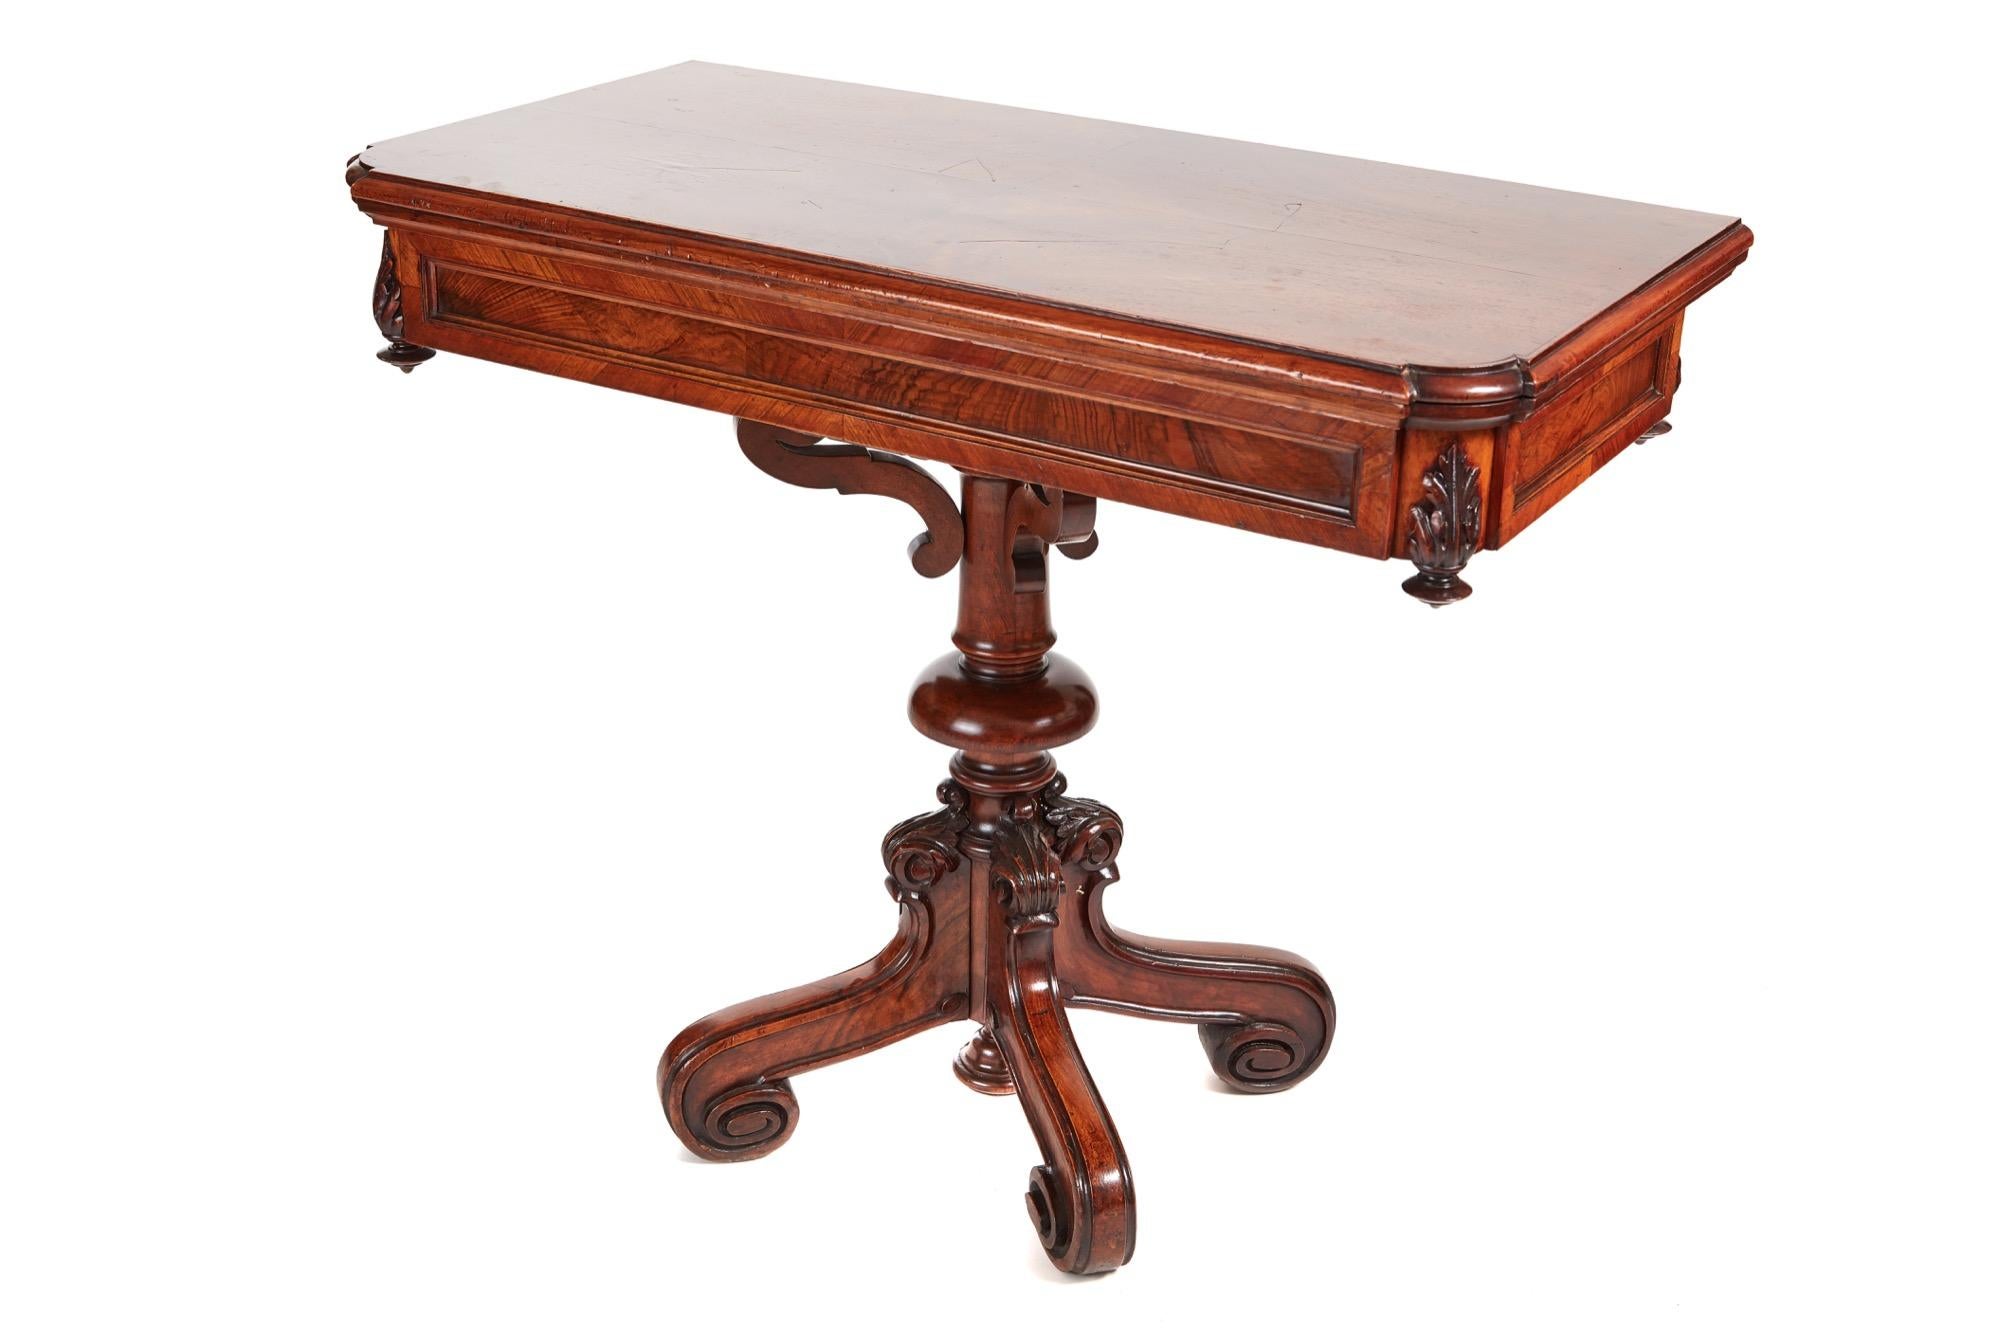 This is an unusual Victorian walnut card table with a swivel top, green baize interior and carvings to the frieze. It has a lovely turned carved column. It stands on four carved shaped legs. It is all in solid walnut.

Excellent condition and superb